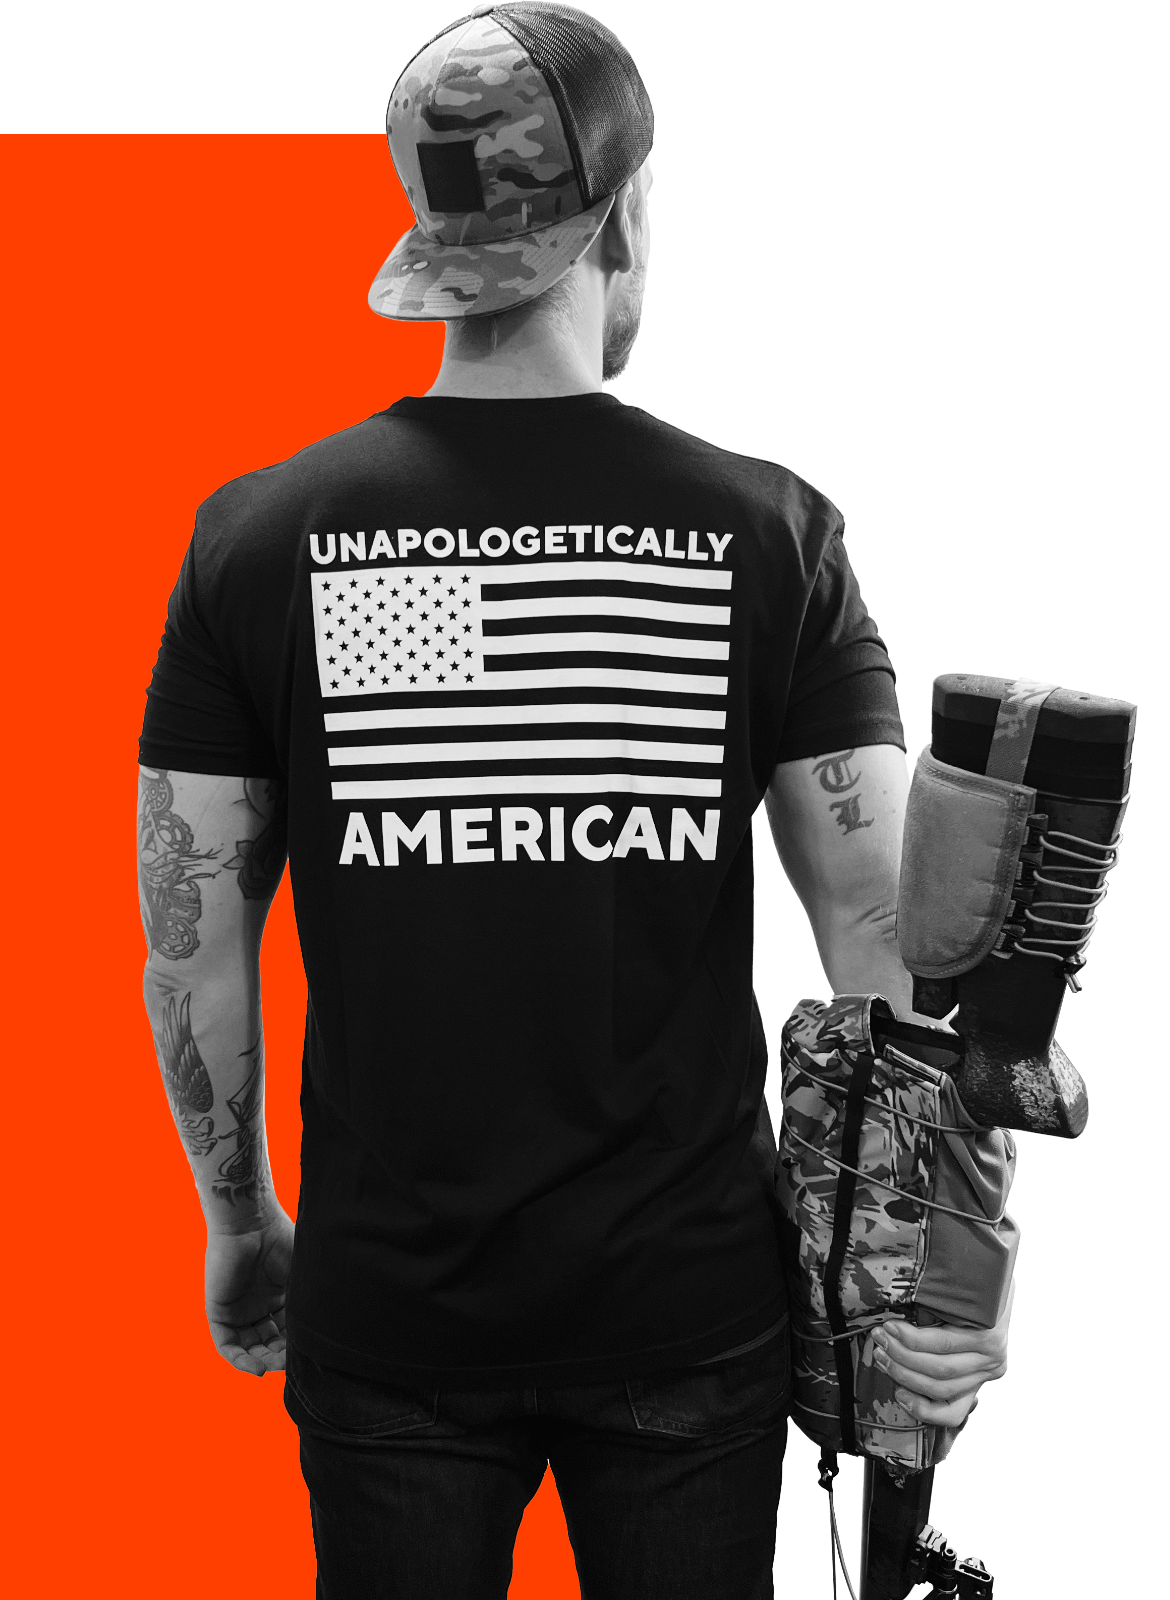 Unapologetically America Shirt Holding Rifle